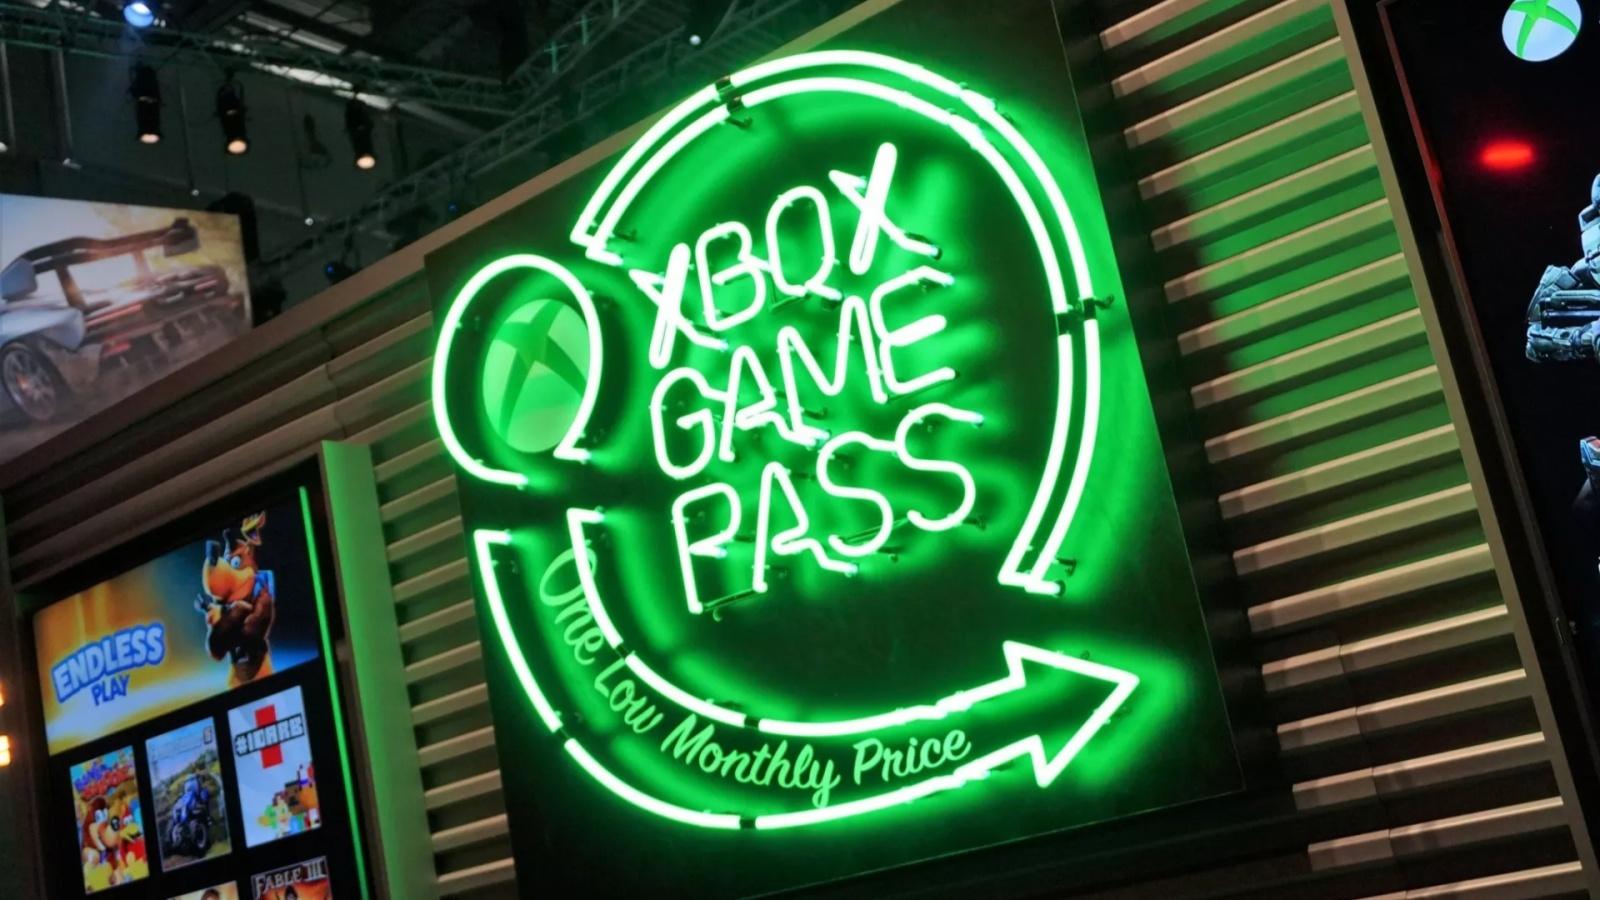 Microsoft says it has stopped its Xbox Game Pass $1 trial offer